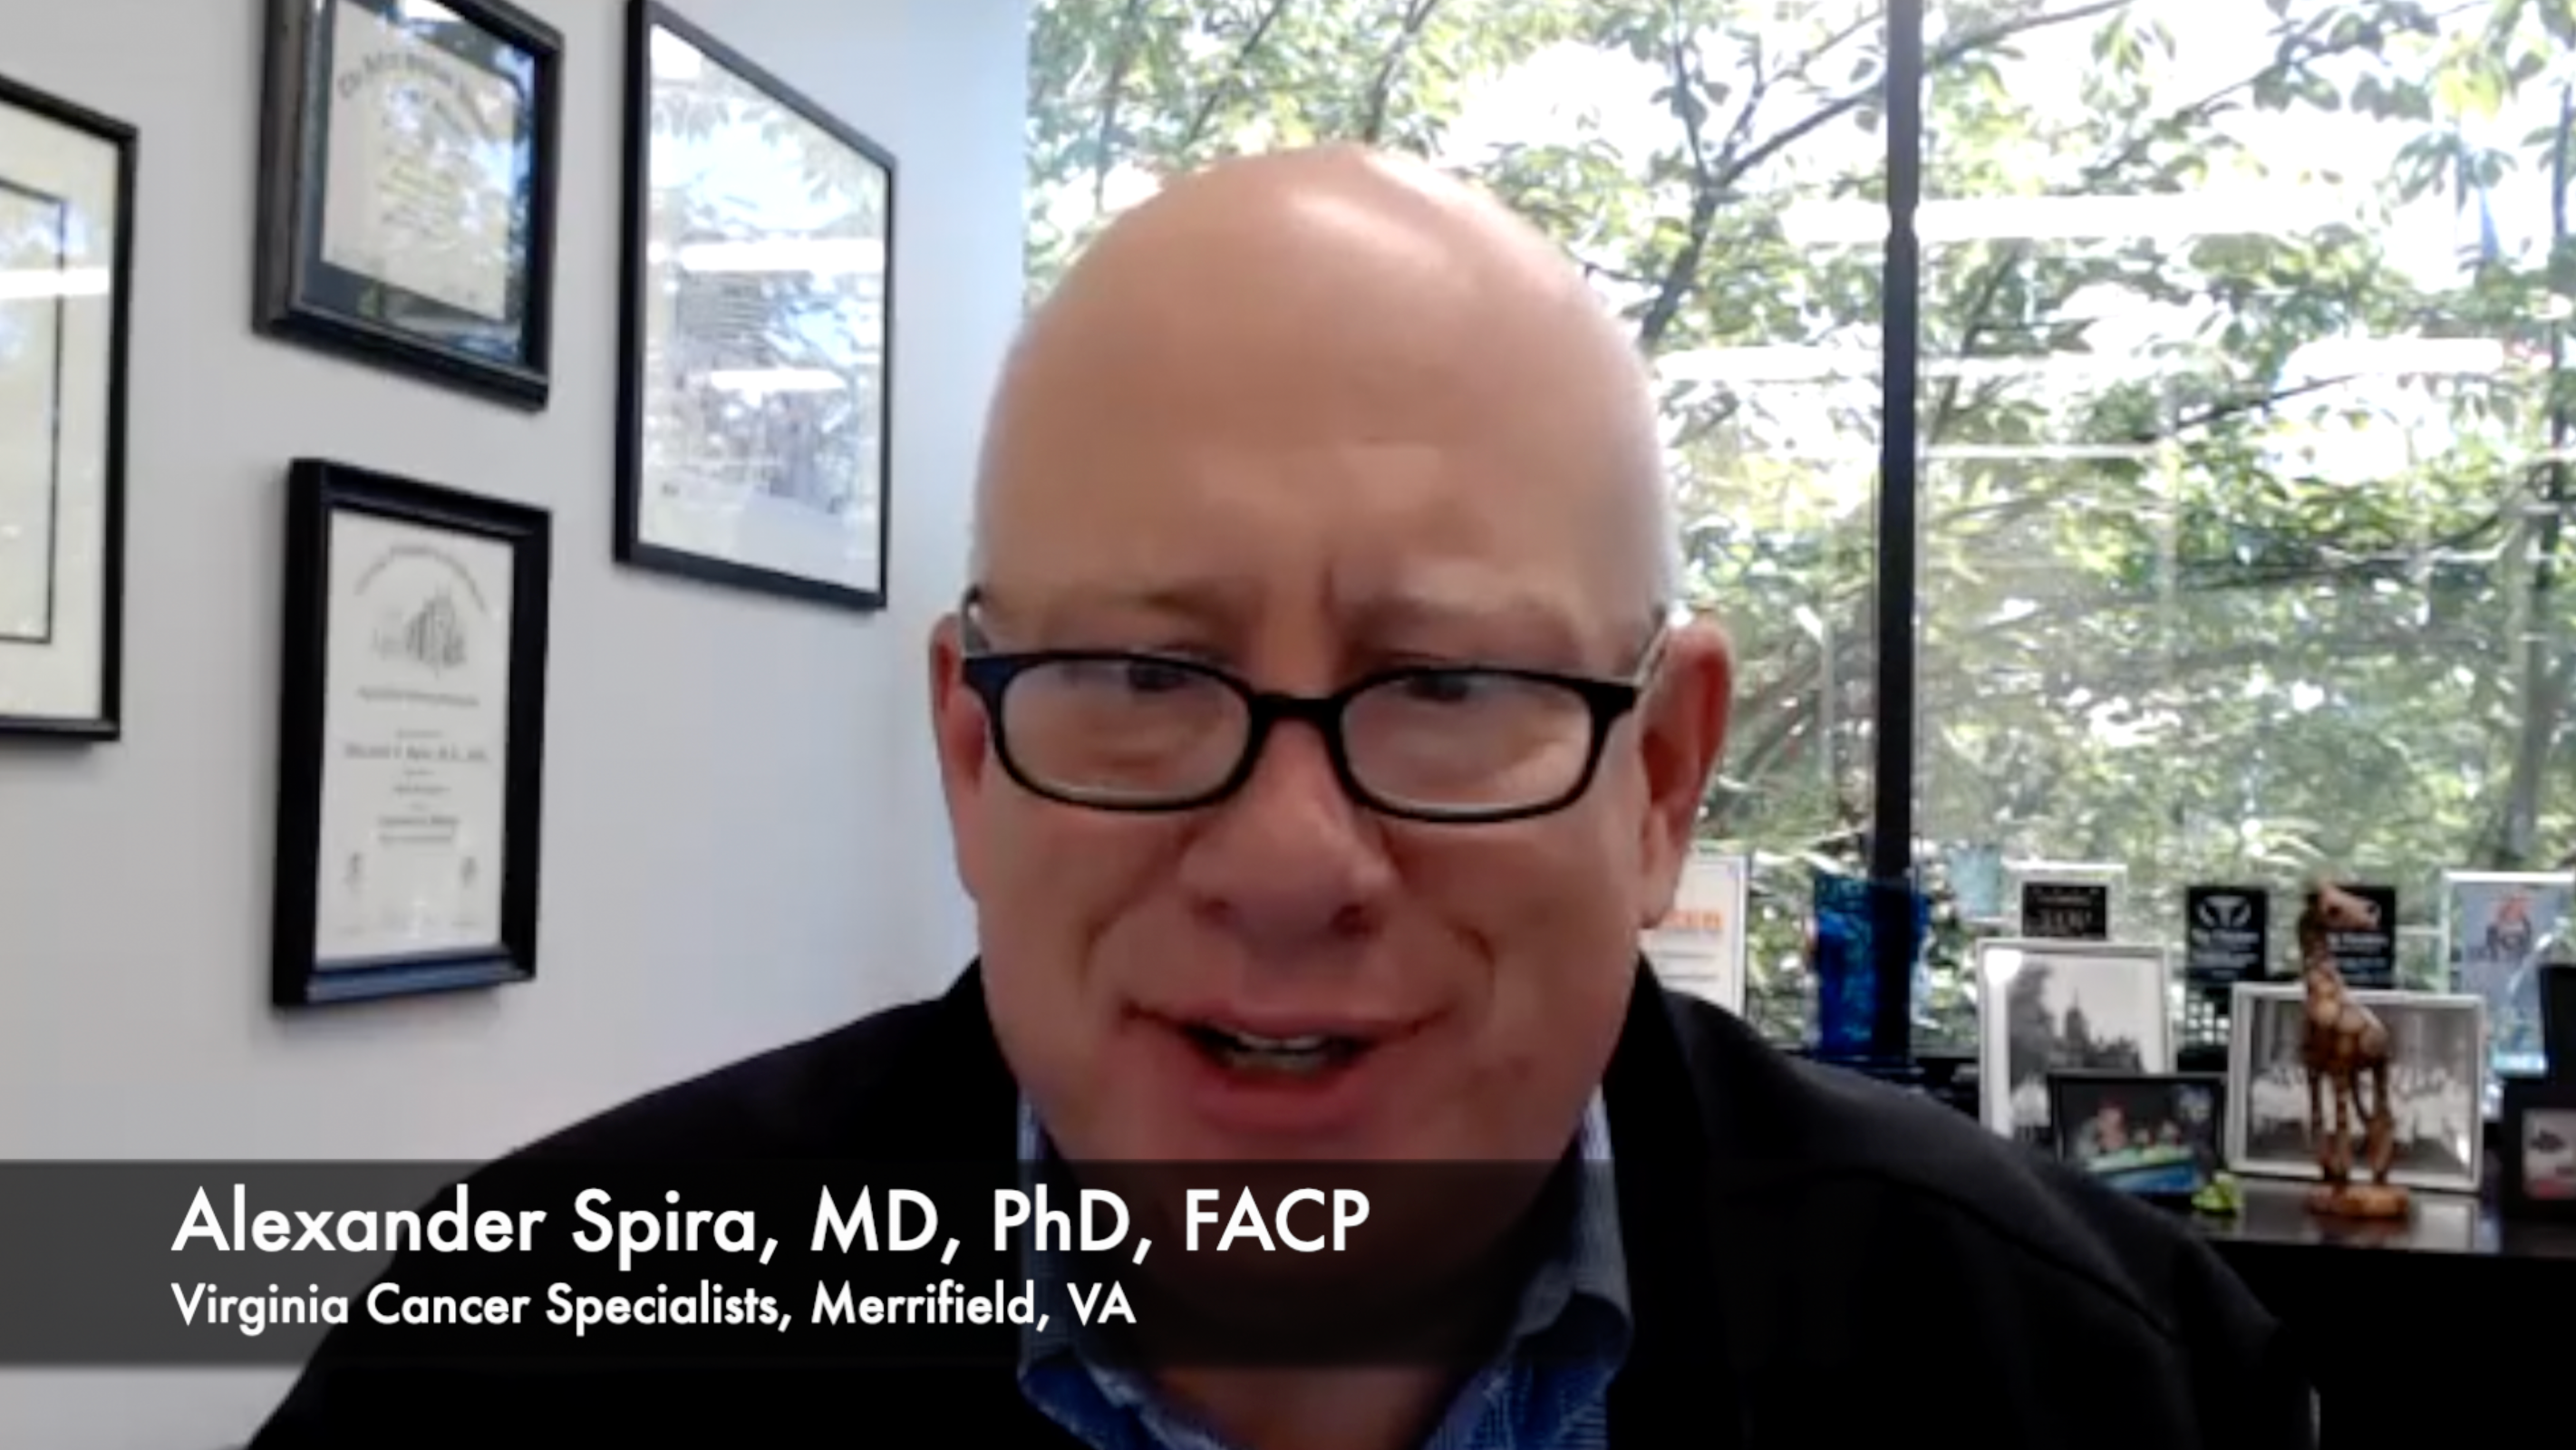 Alexander Spira, MD, PhD, FACP, Discusses Impacts of COVID-19 at Individual Treatment Facilities 